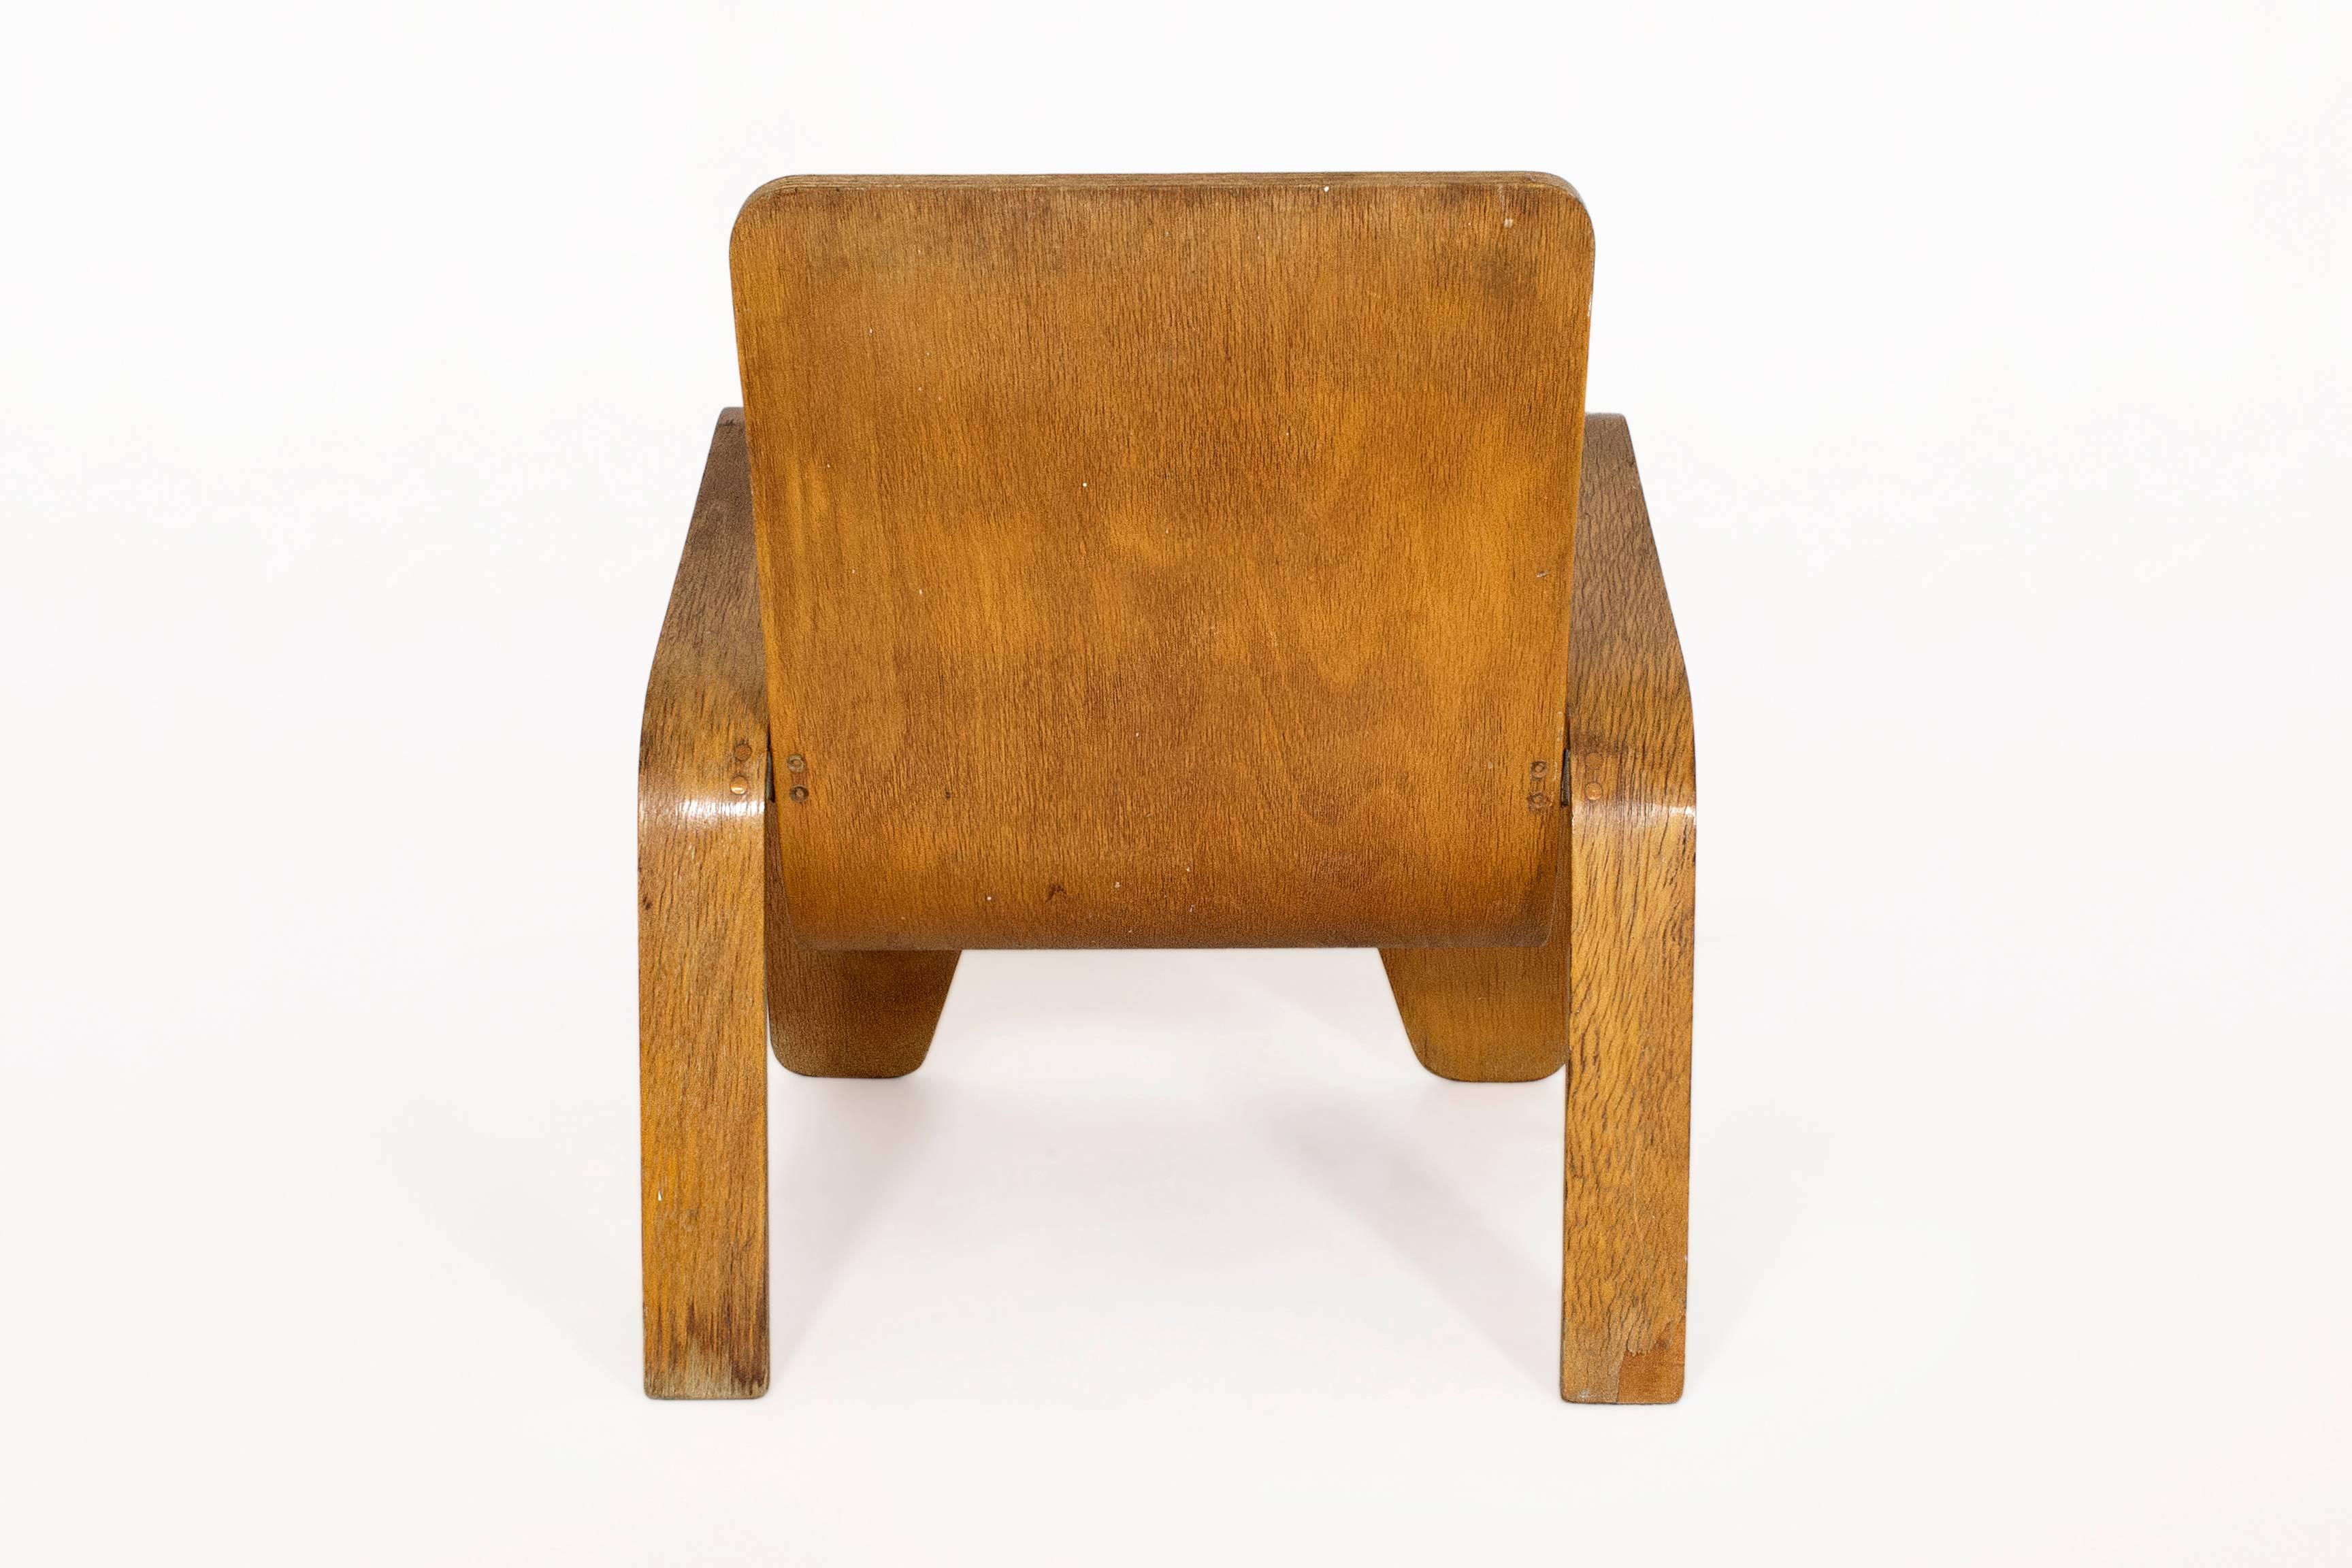 Mid-Century Modern Lounge Chair by Han Pieck for Lawo Ommen, circa 1940, Netherlands